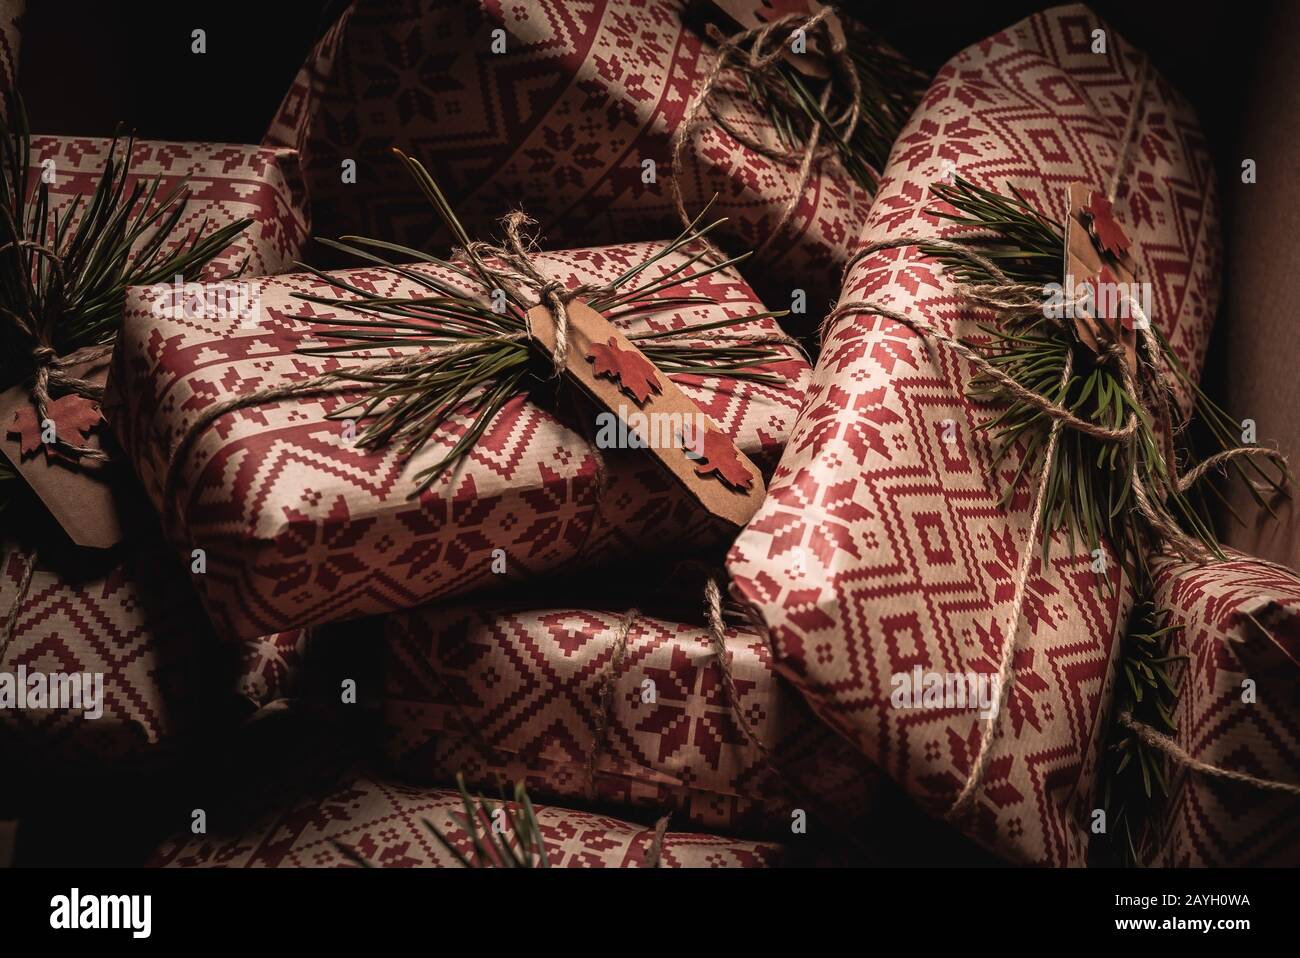 Many christmas presents piled up in a box with creative handmade decorative rustic diy gift wrapped in natural vintage retro wrapping paper Stock Photo